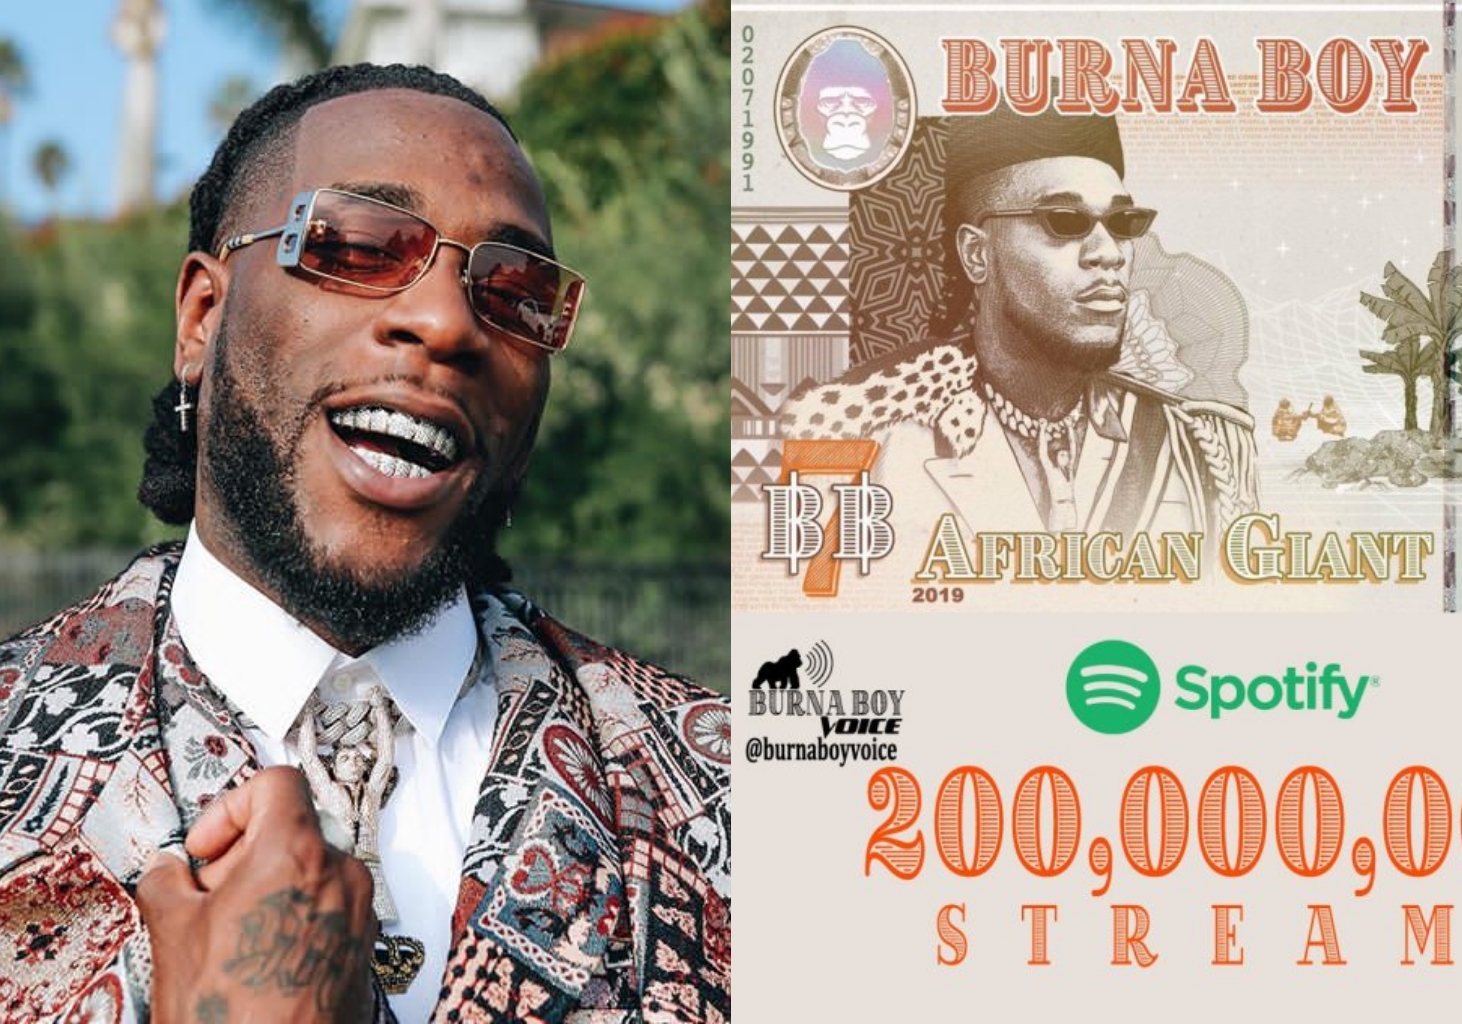 Burna Boy's 'African Giant' becomes most streamed album on Spotify